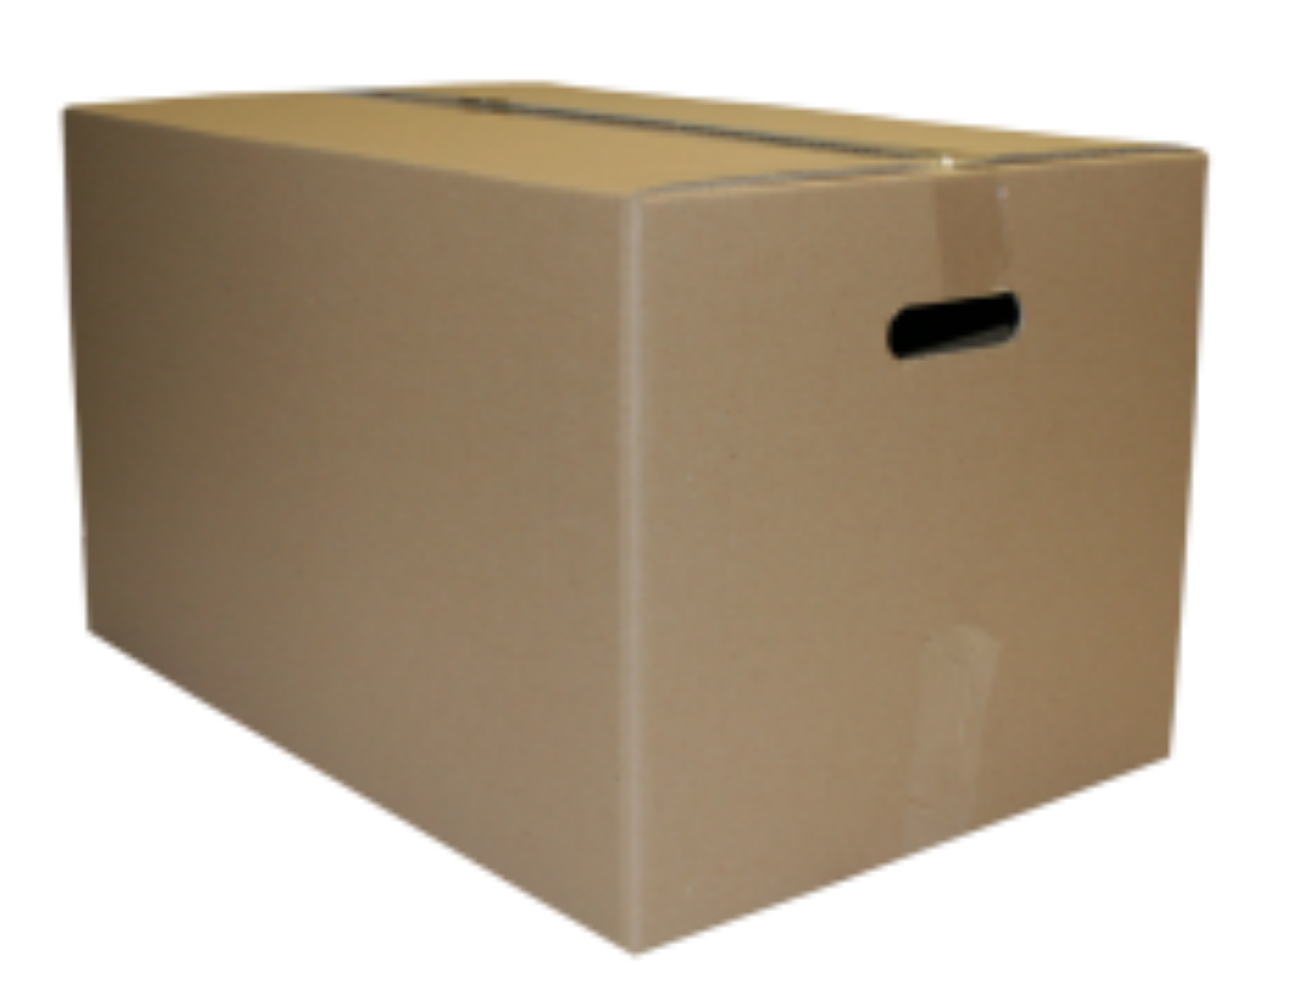 A rectangular carry box with sturdy handles on either side, designed for easy transportation.